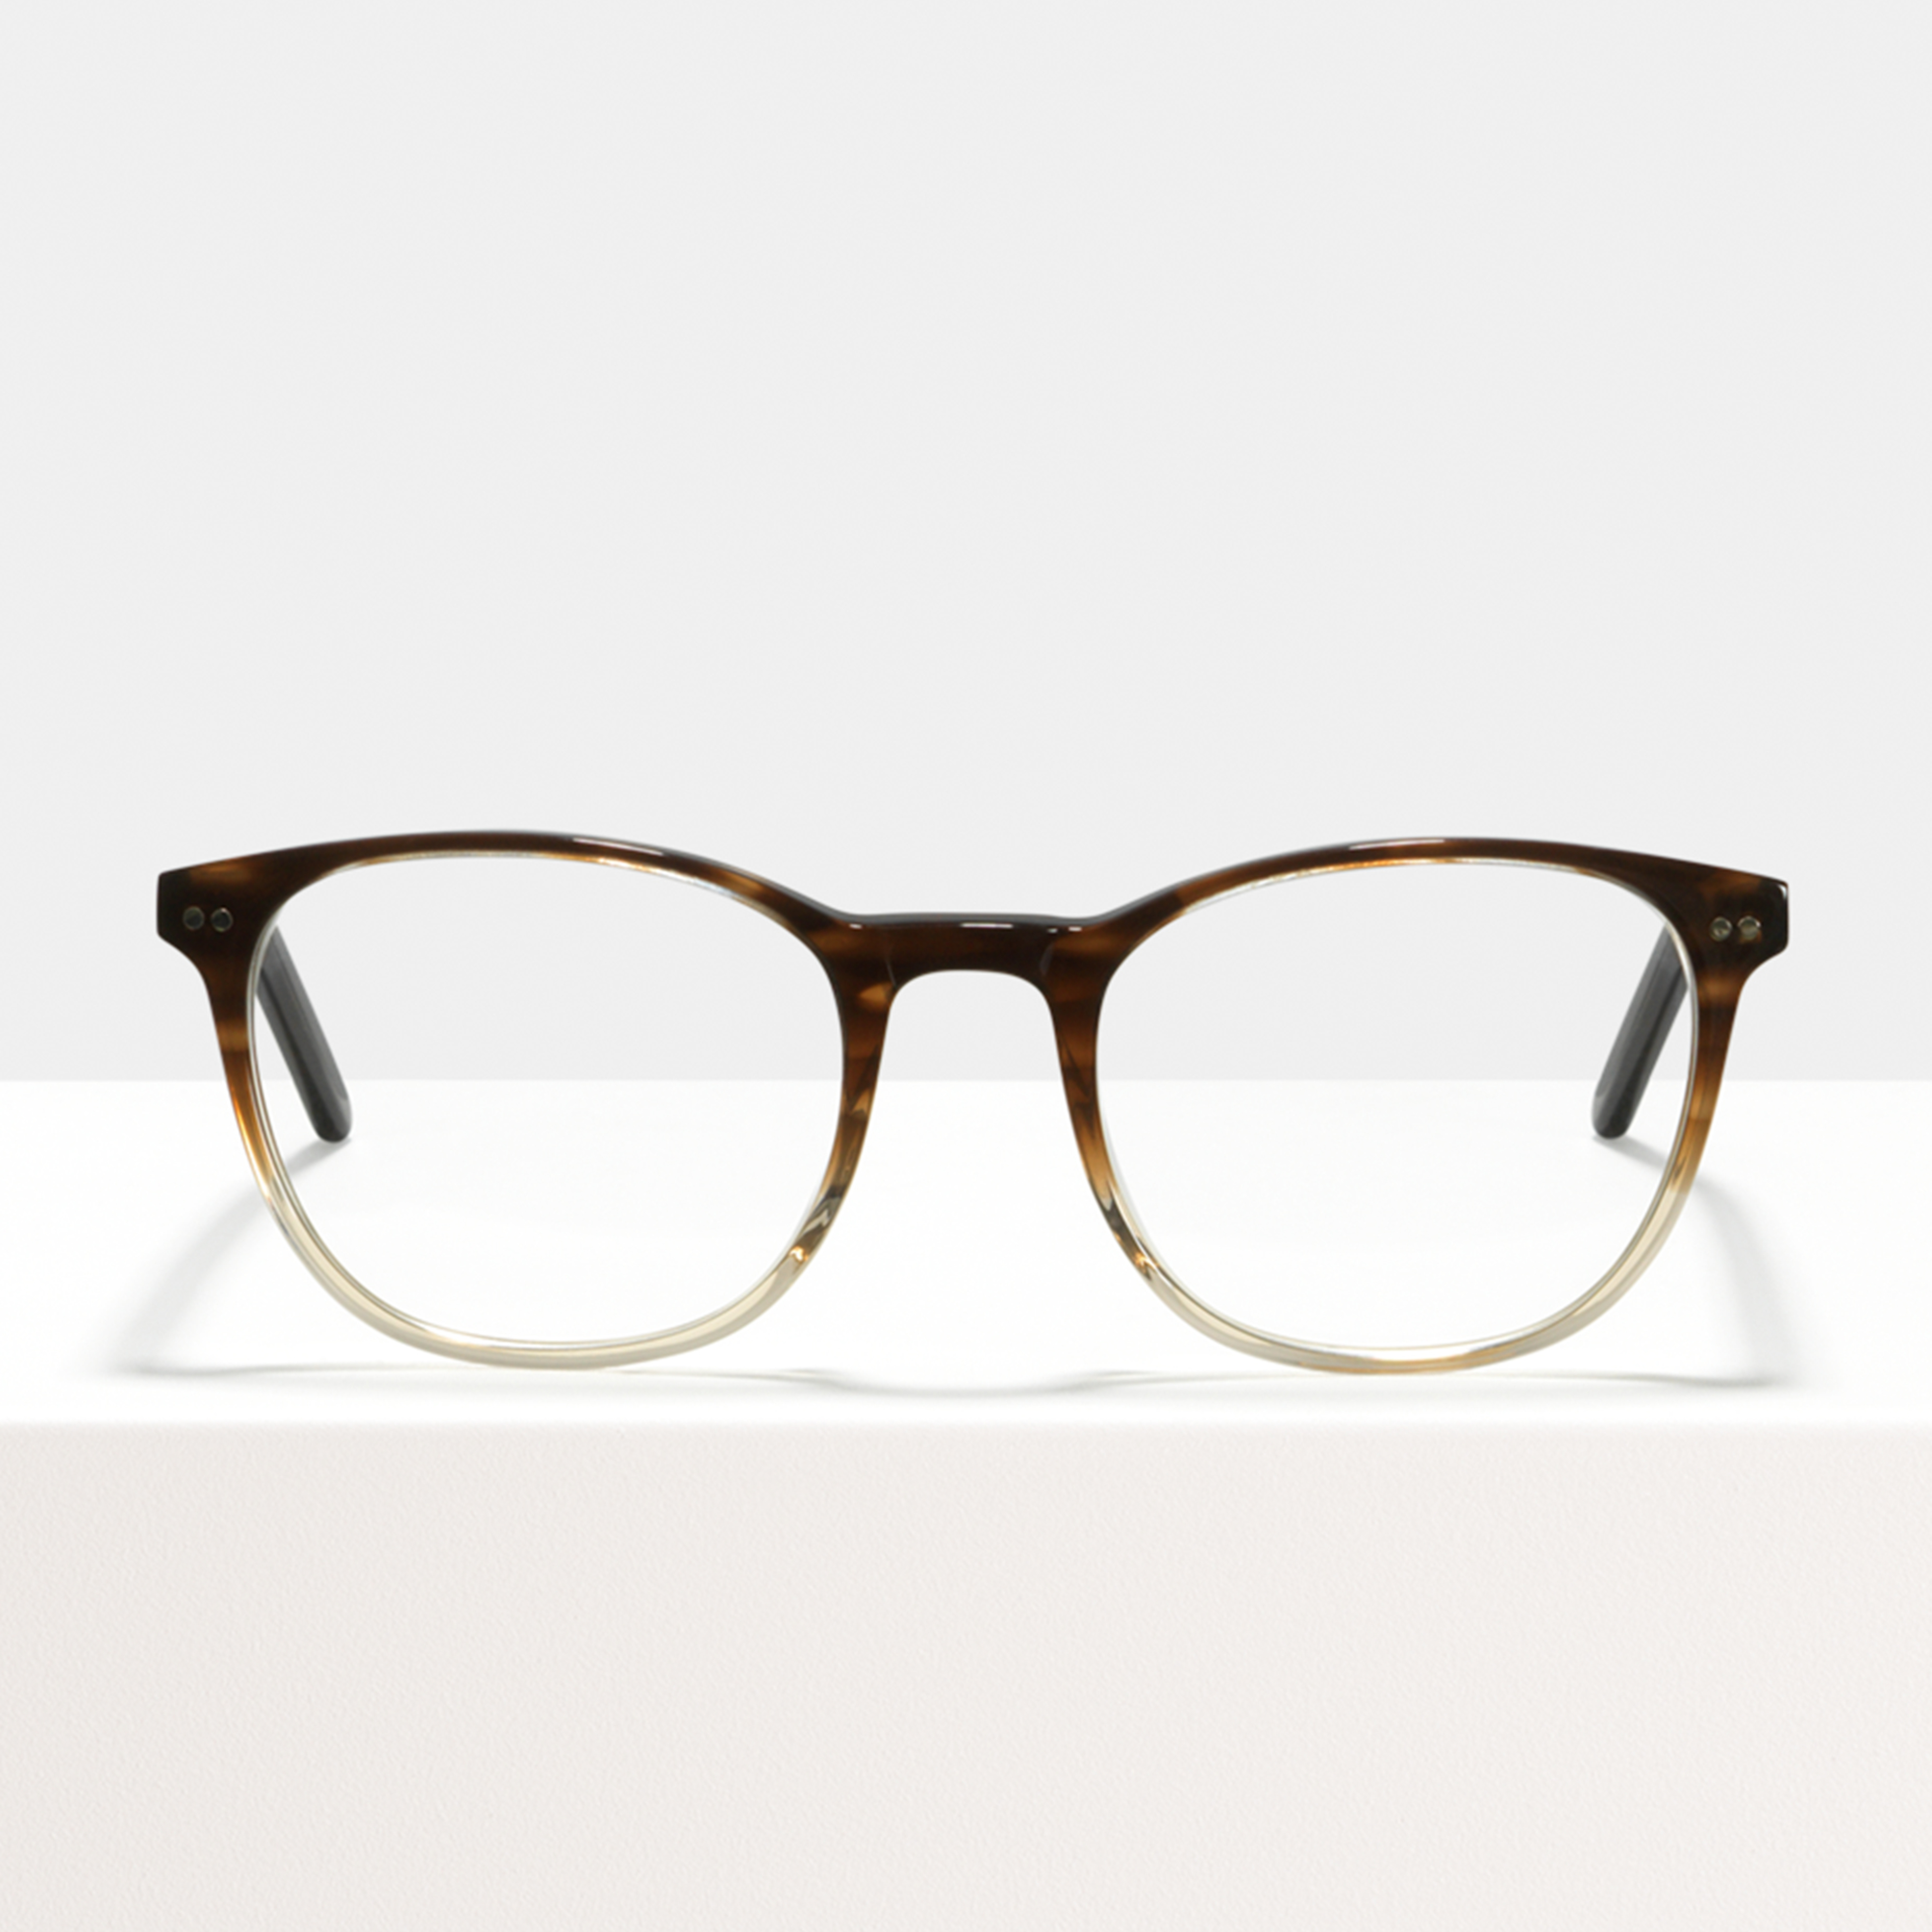 Ace & Tate Glasses | Square Acetate in Beige, Brown, Gold, Grey